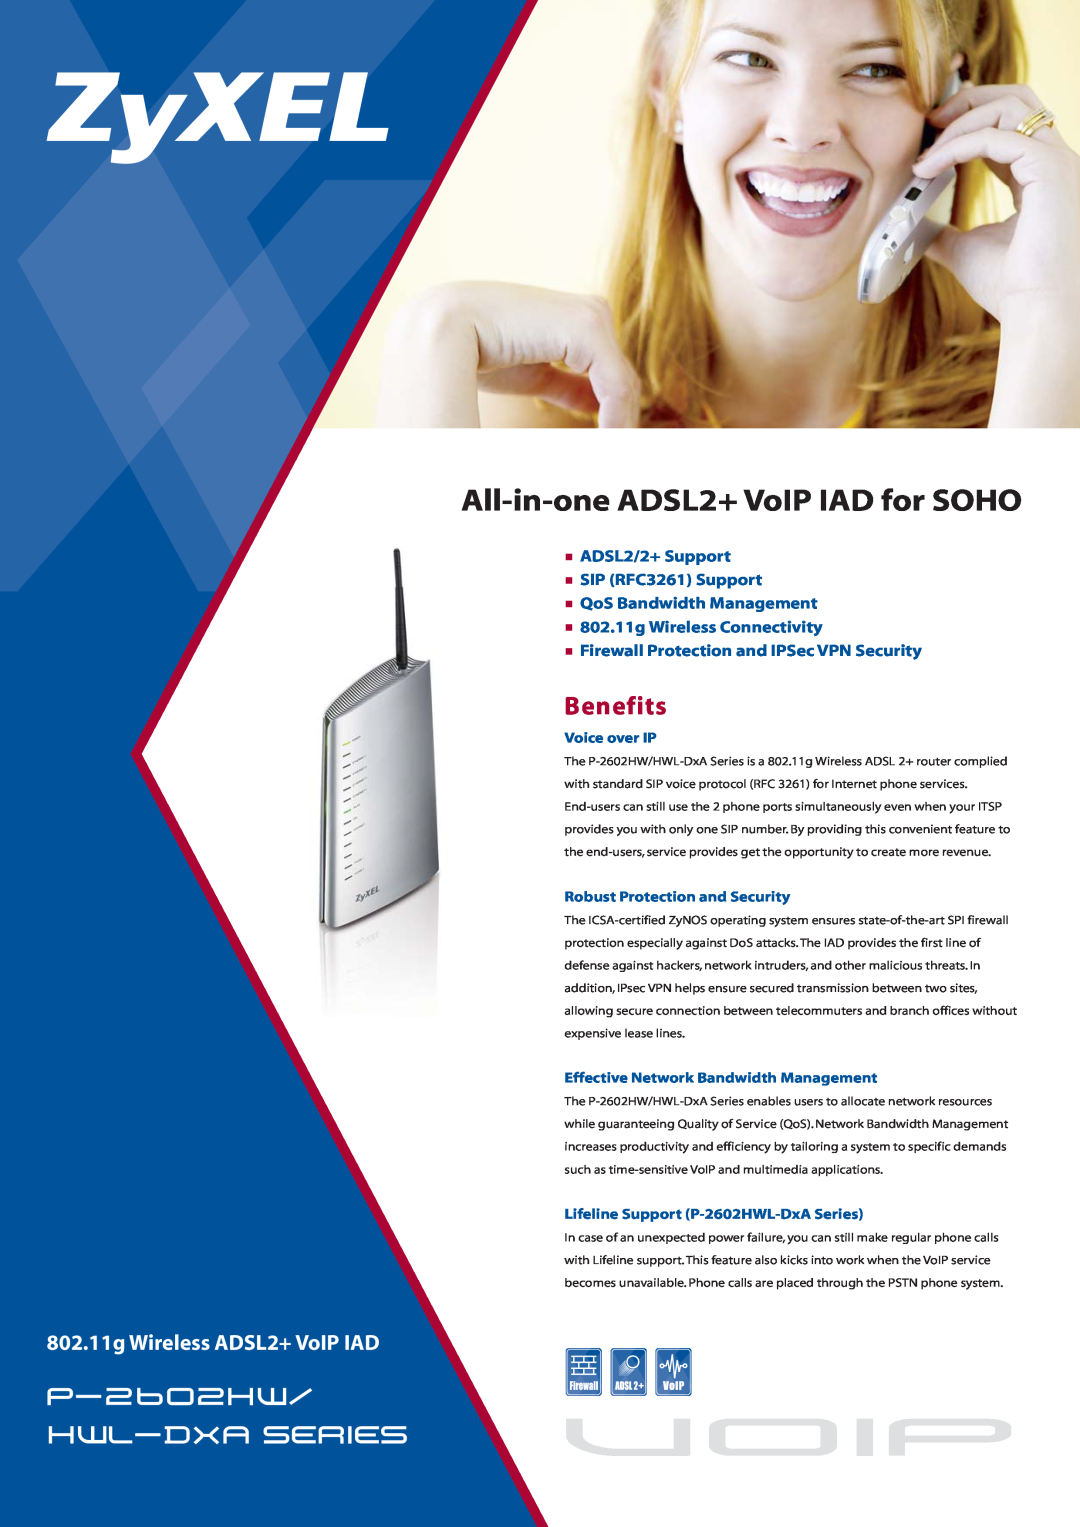 ZyXEL Communications P-2602HW user service Benefits, voip, All-in-one ADSL2+ VoIP IAD for SOHO, p-2602hw hwl-dxa series 